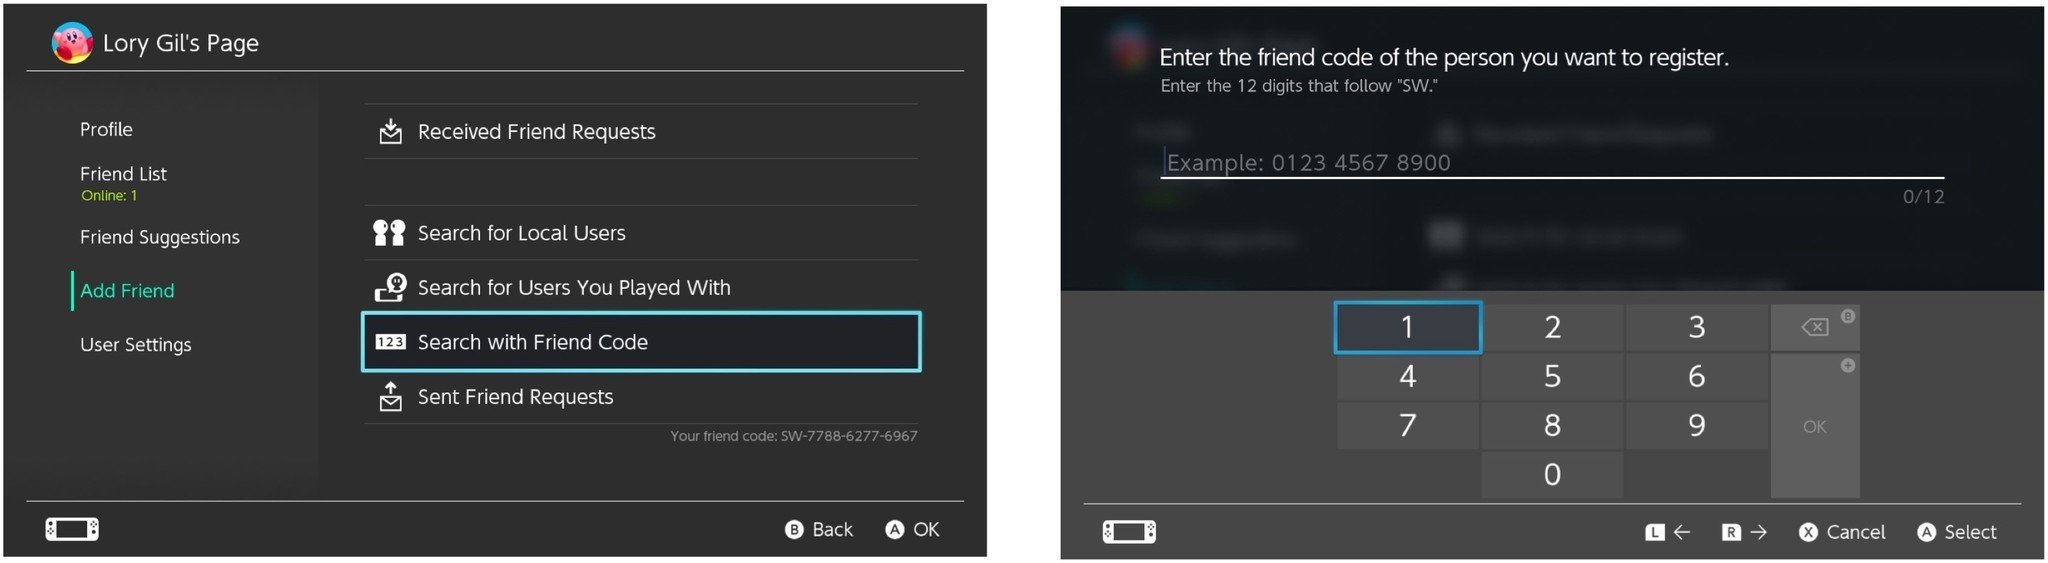 Select Search with Friend Code, then enter the friend code